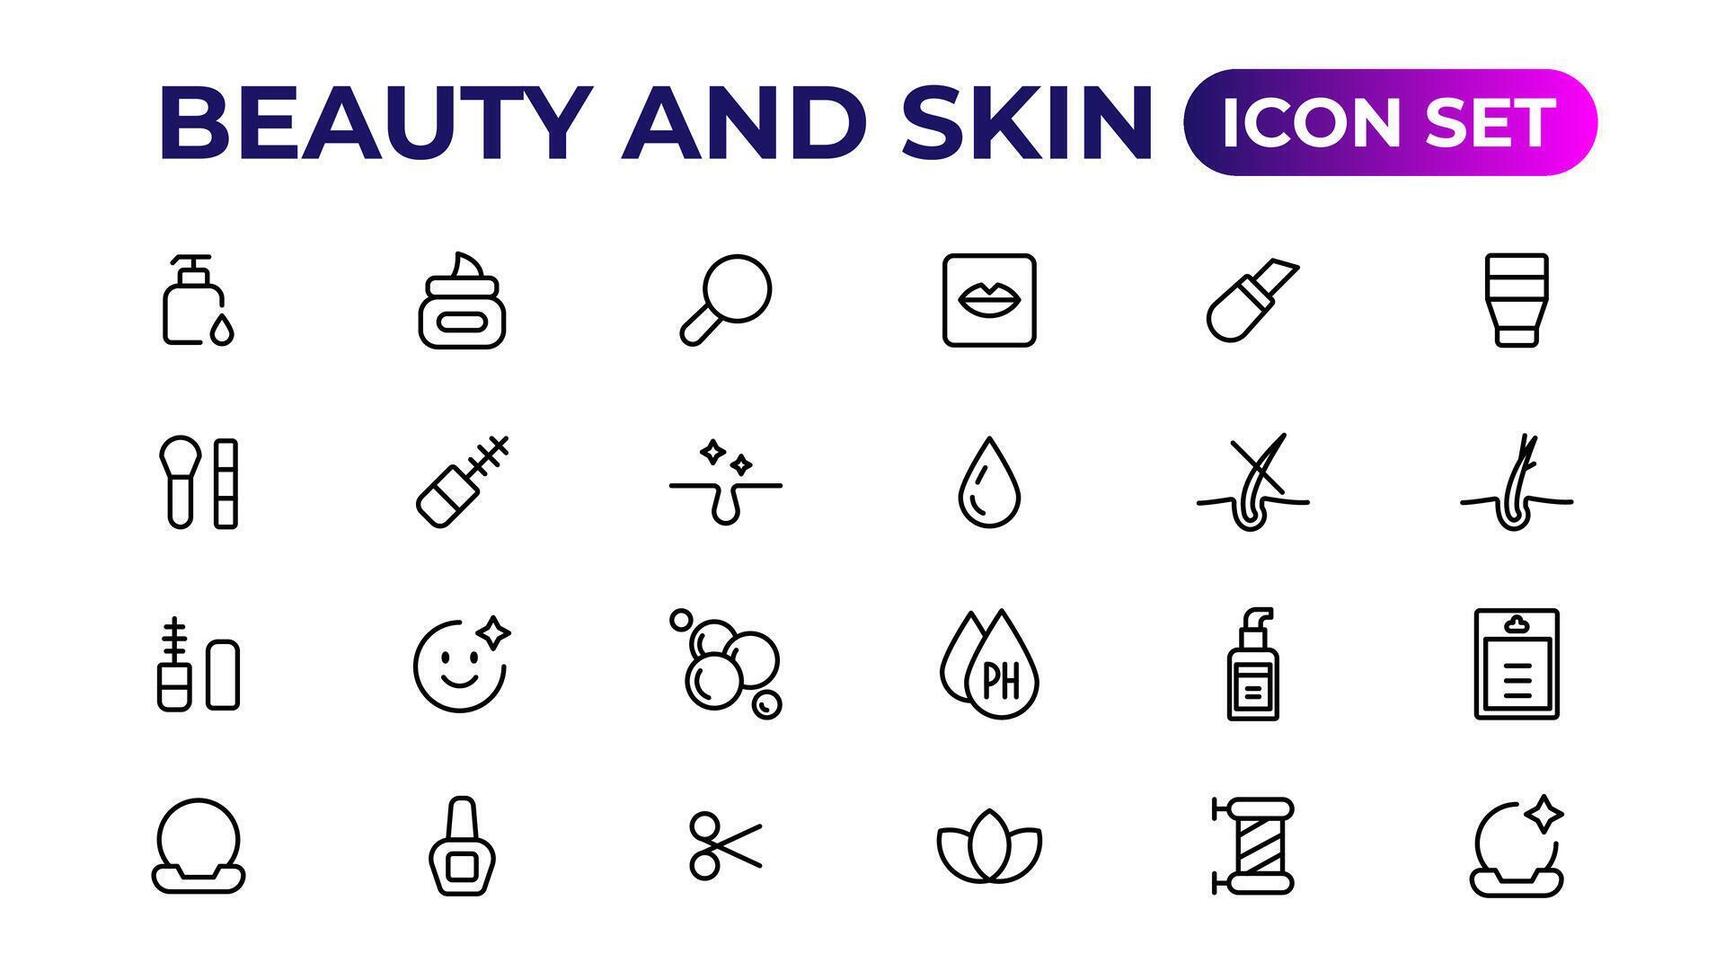 Beauty. Attributes of beauty for men and women.Skin care line icons set. vector